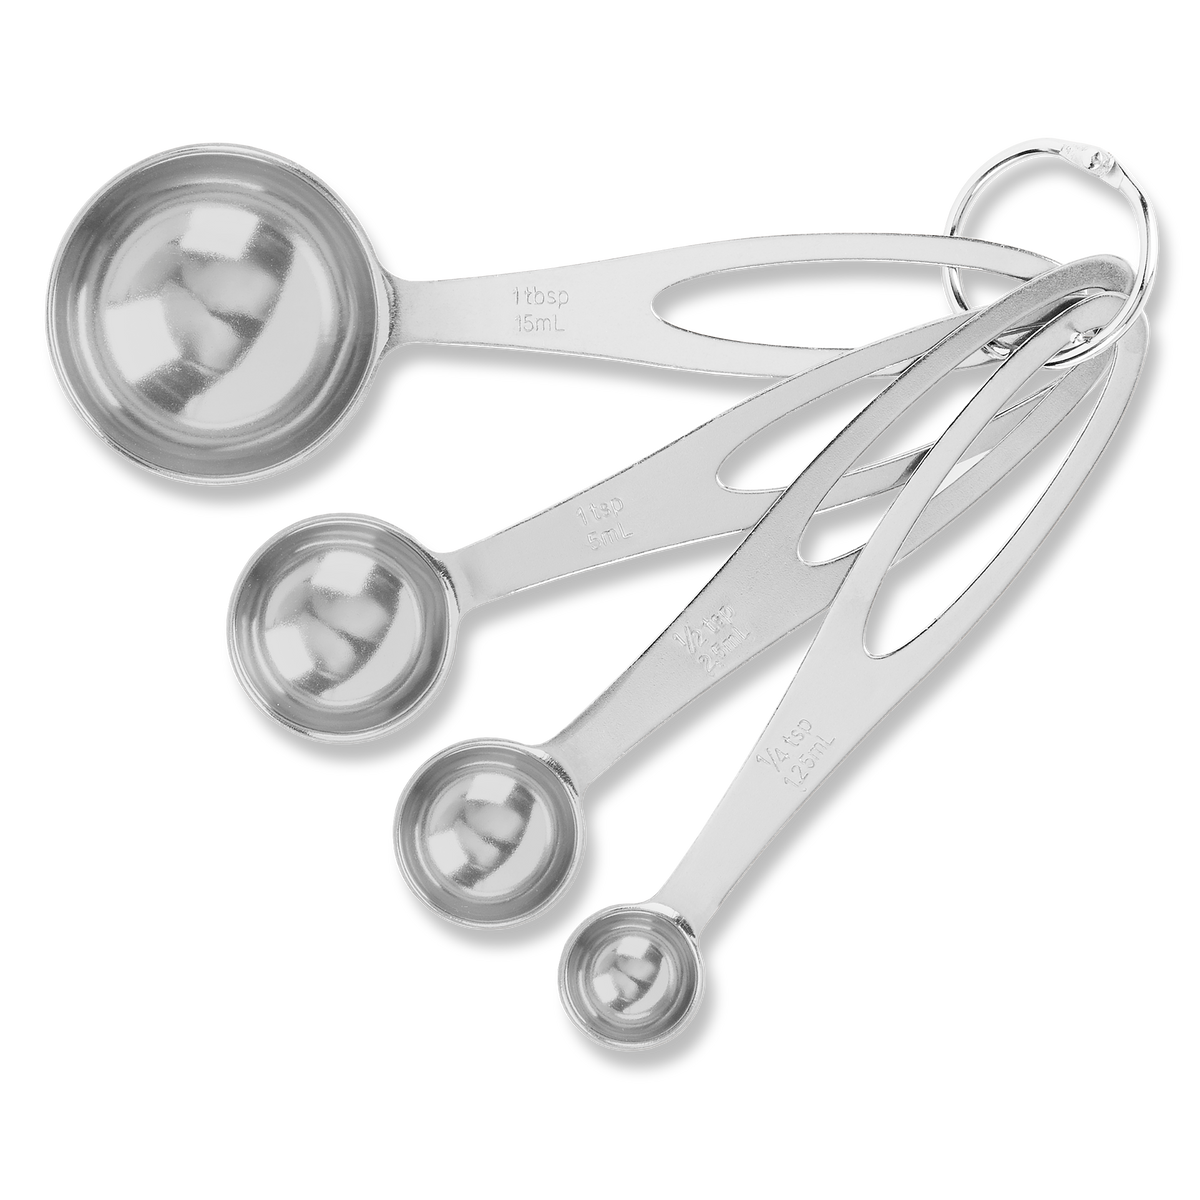 Top view, showing hemispherical spoon shapes of the brandless measuring spoon set.